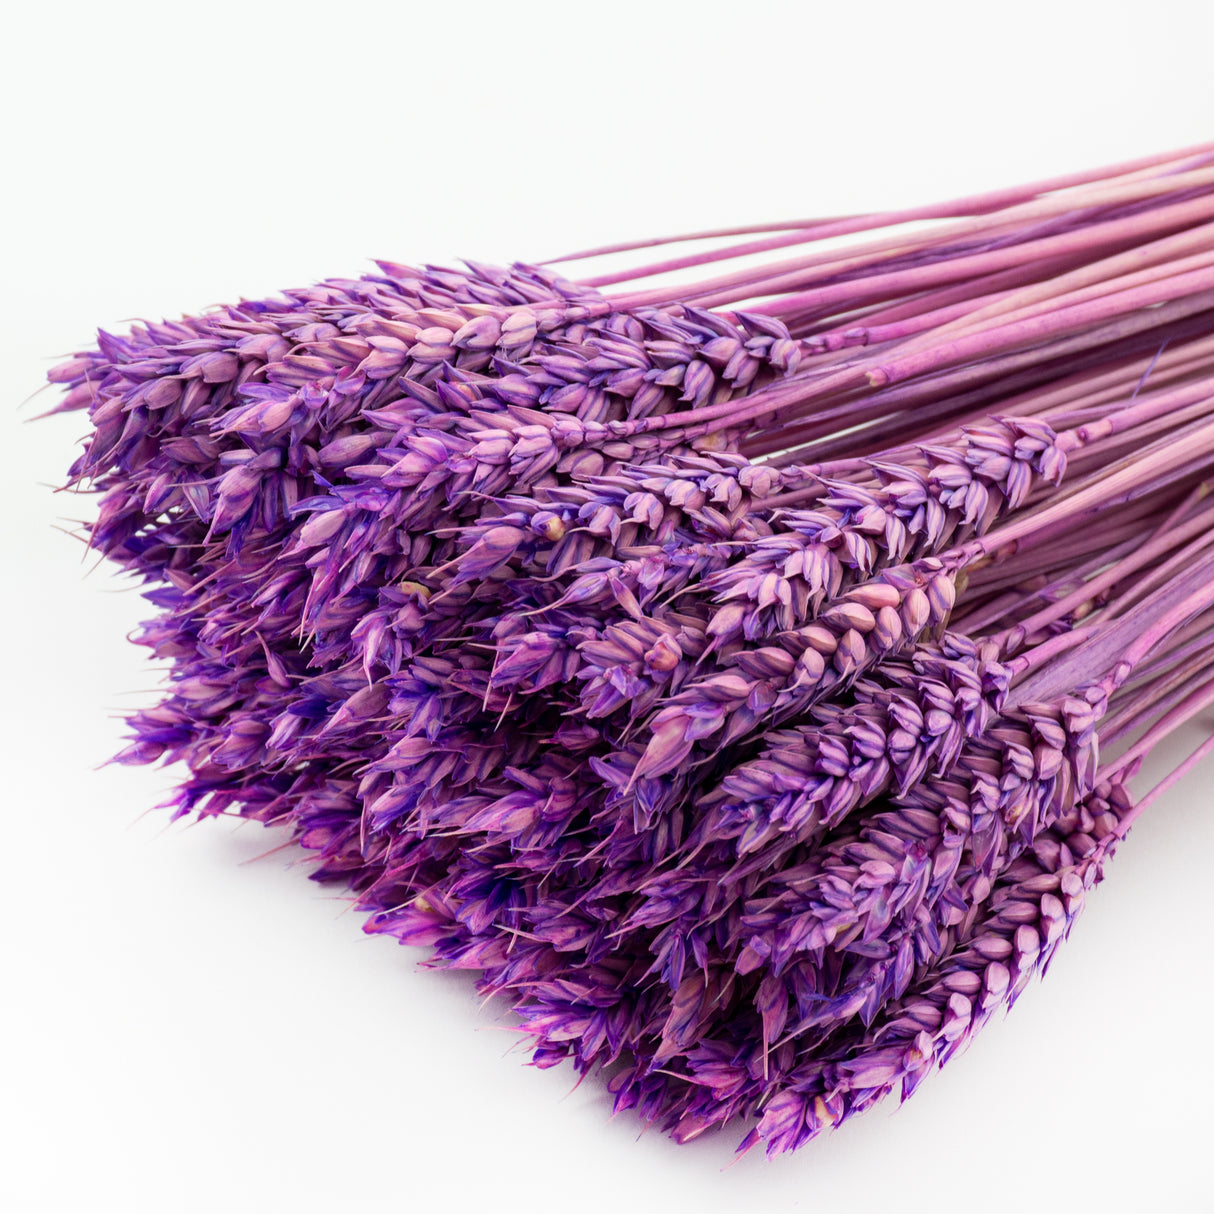 This image shows a bunch of milka, or lilac, triticum, or wheat, against a white background